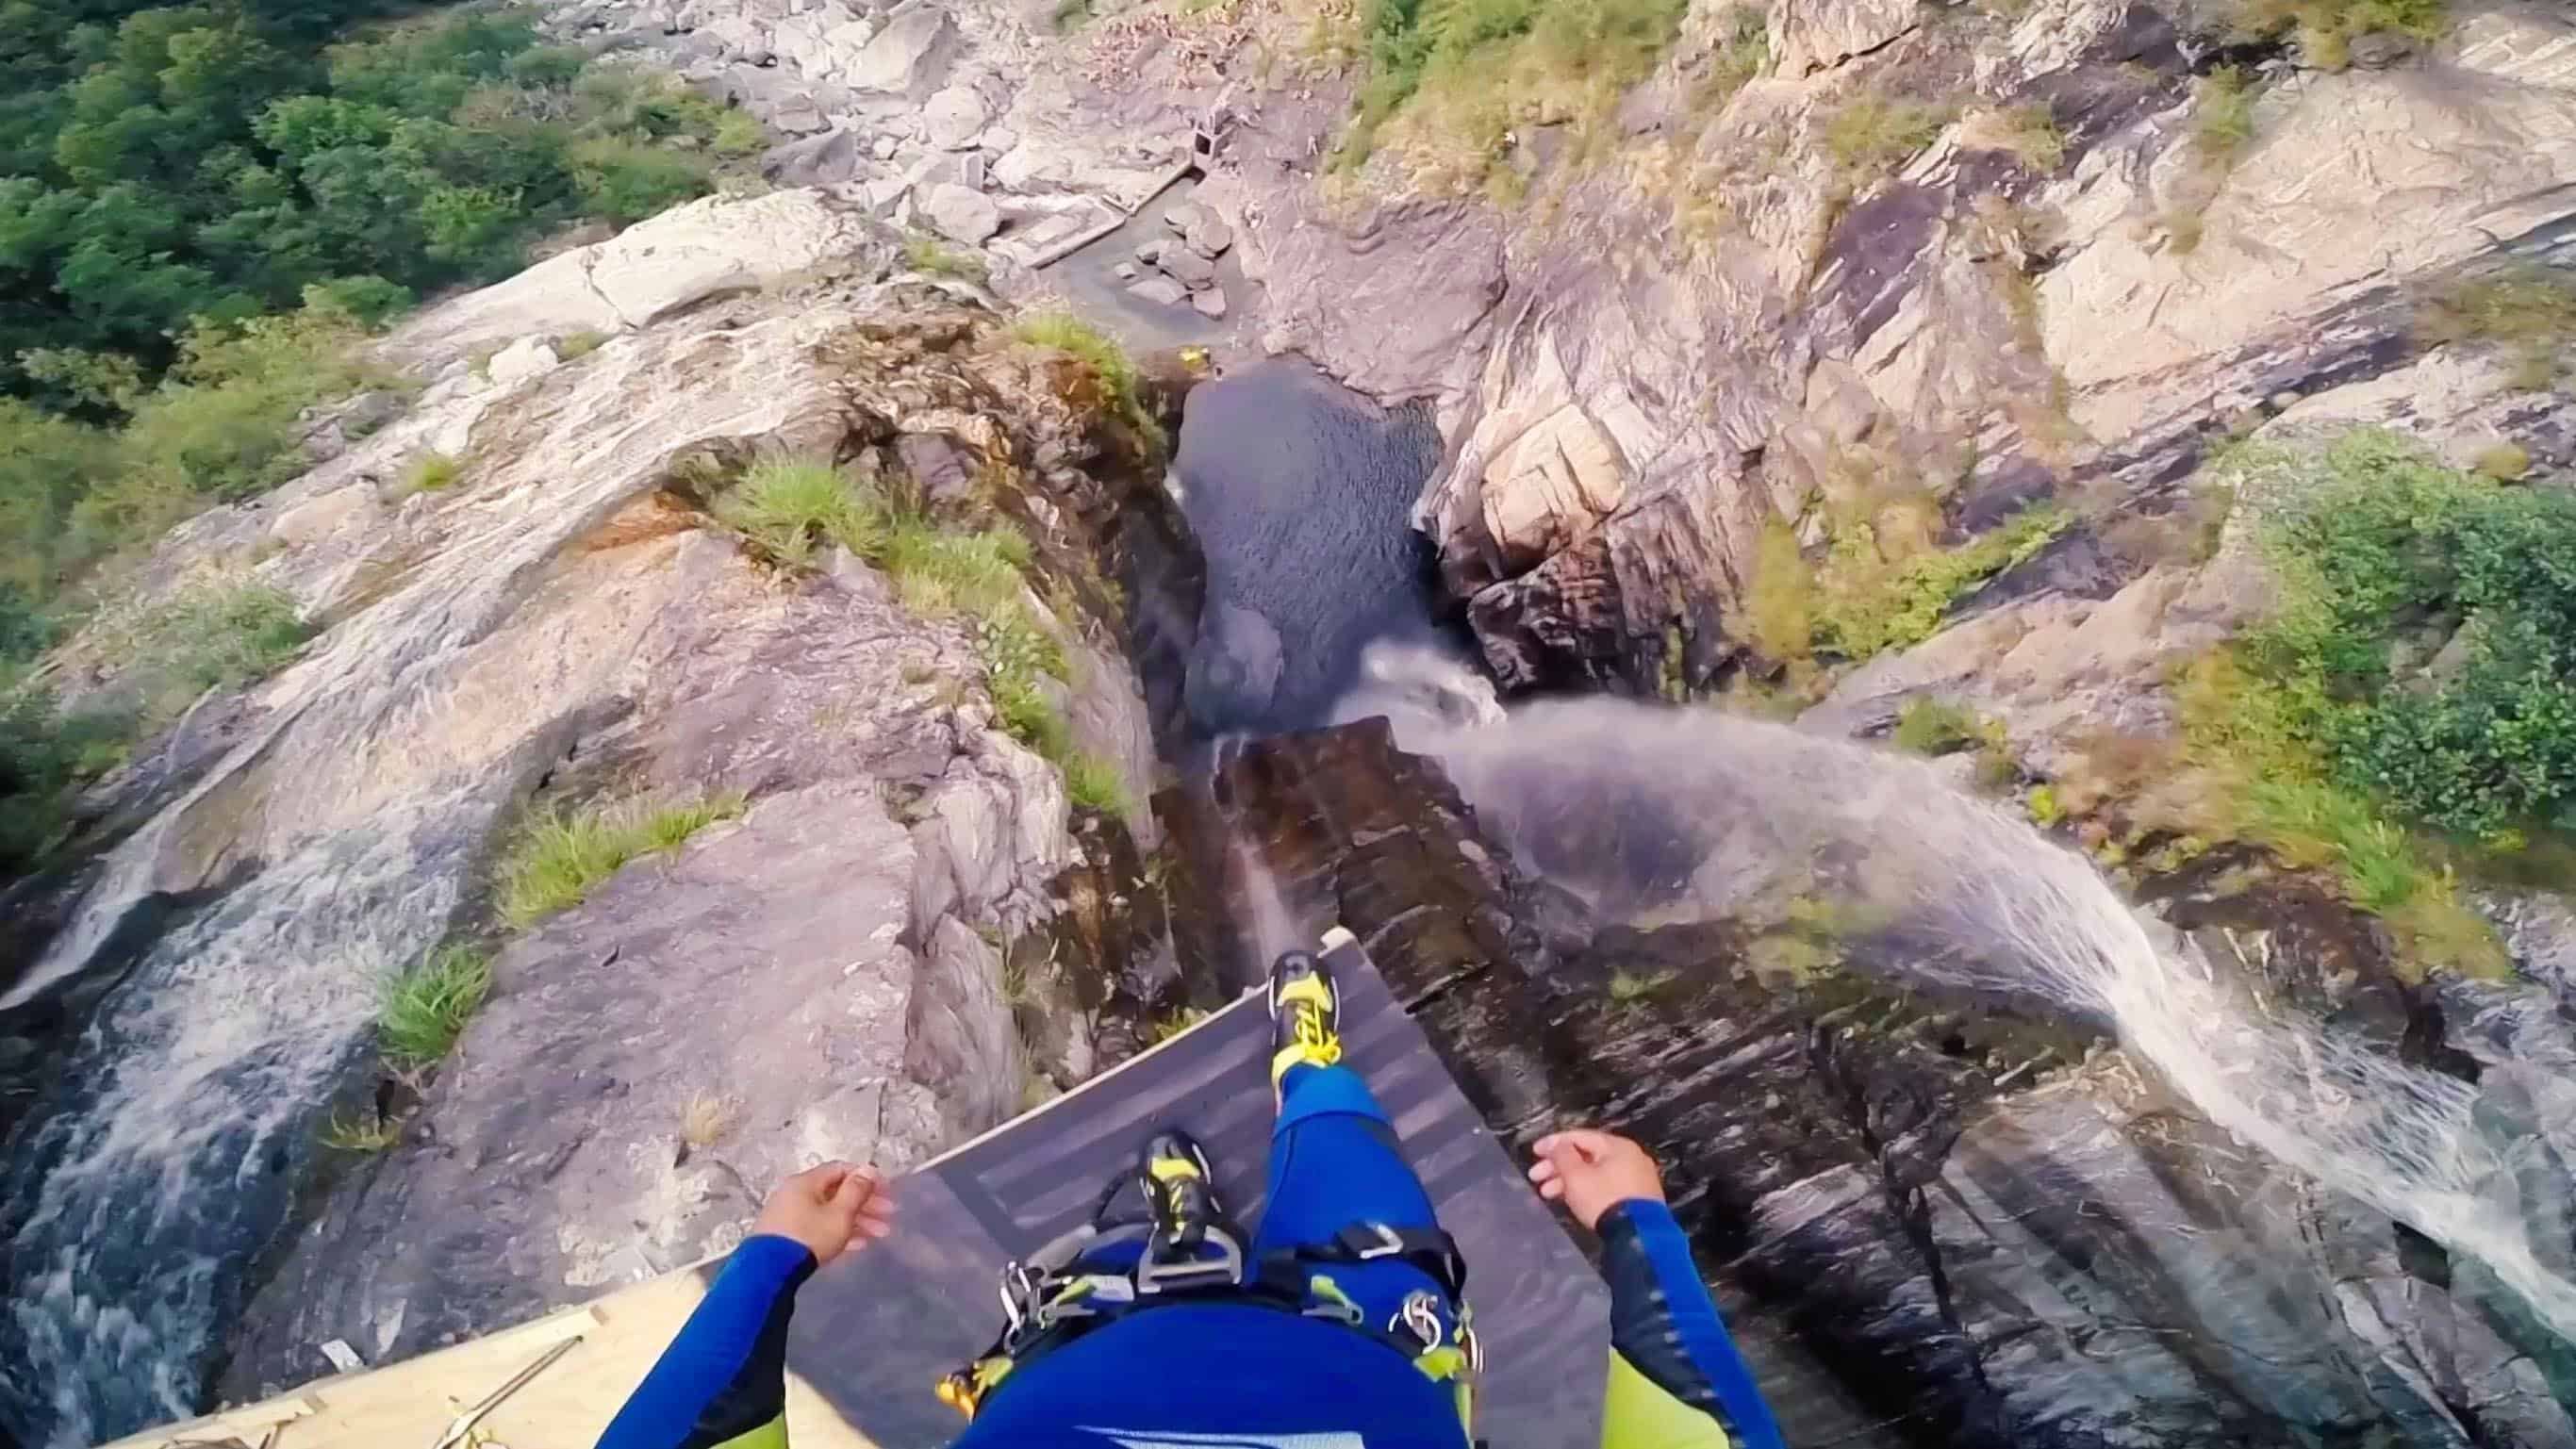 Sick 59 meter cliff jump from the first person perspective